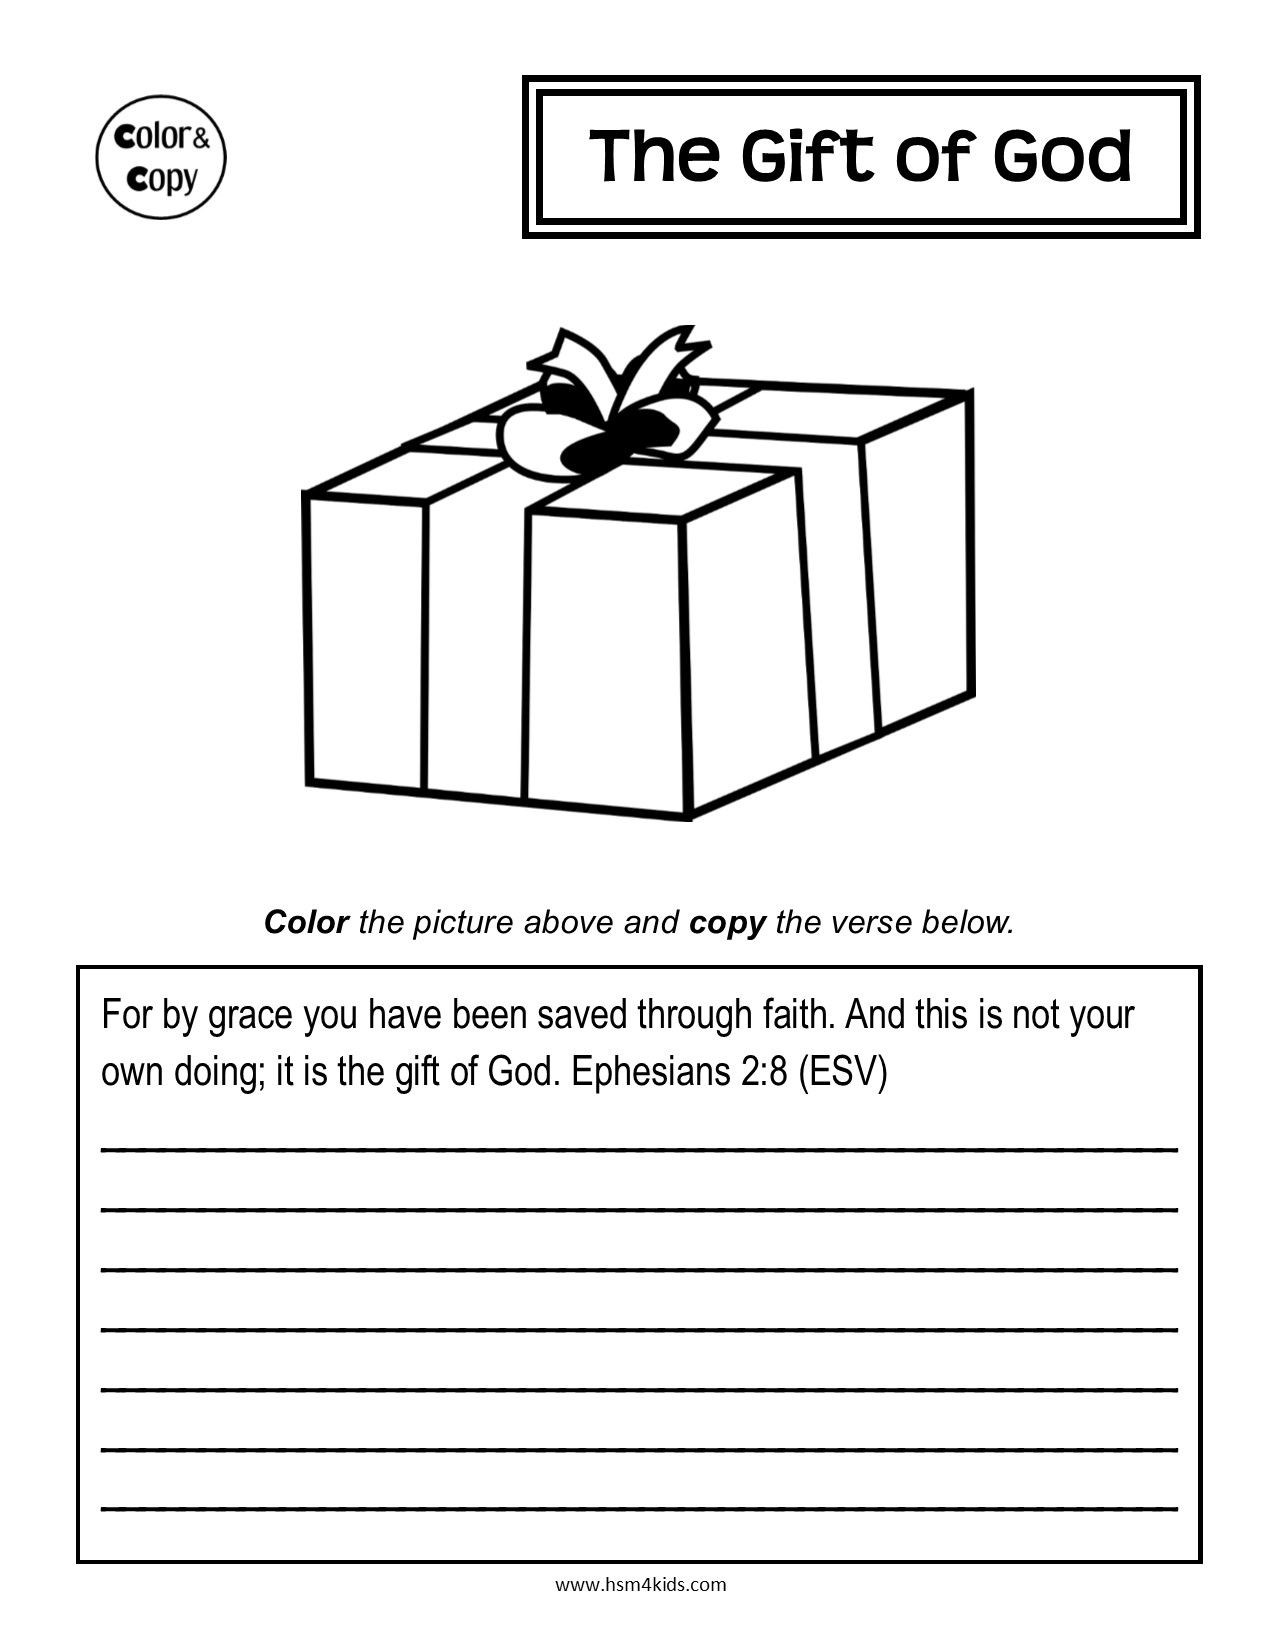 Free Printable Religious Worksheets Free Color and Copy Bible Worksheet Ephesians